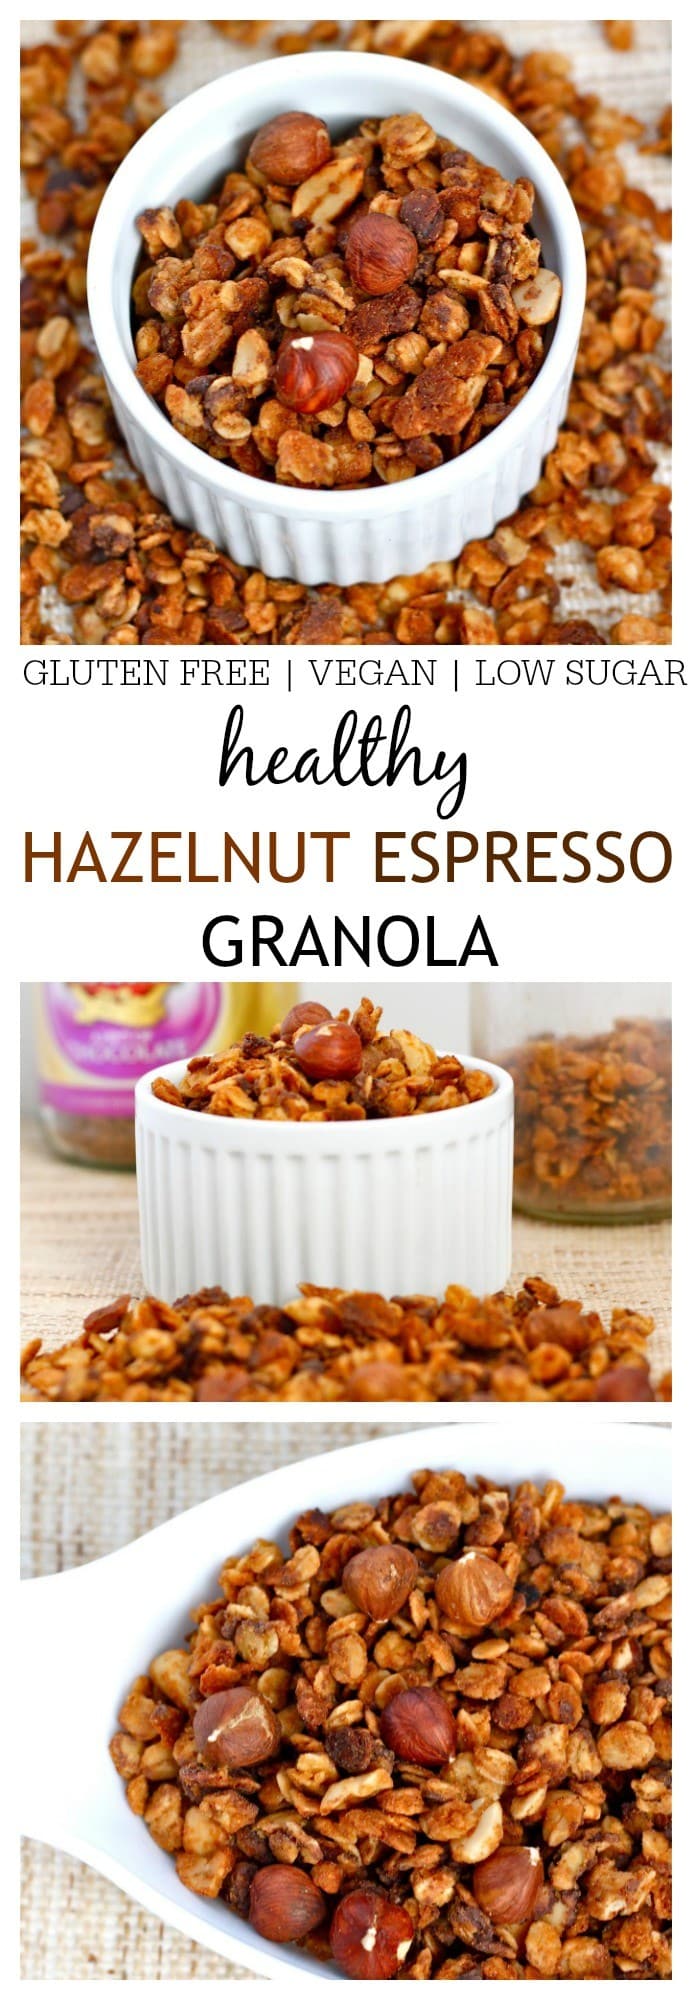 Hazelnut Espresso Granola- A delicious, healthy and nutritious granola recipe which has hints of espresso thanks to ground coffee added in the baking process! This granola is perfect for snacking or for breakfast and is gluten free, refined sugar free and has a vegan version! @thebigmansworld -thebigmansworld.com